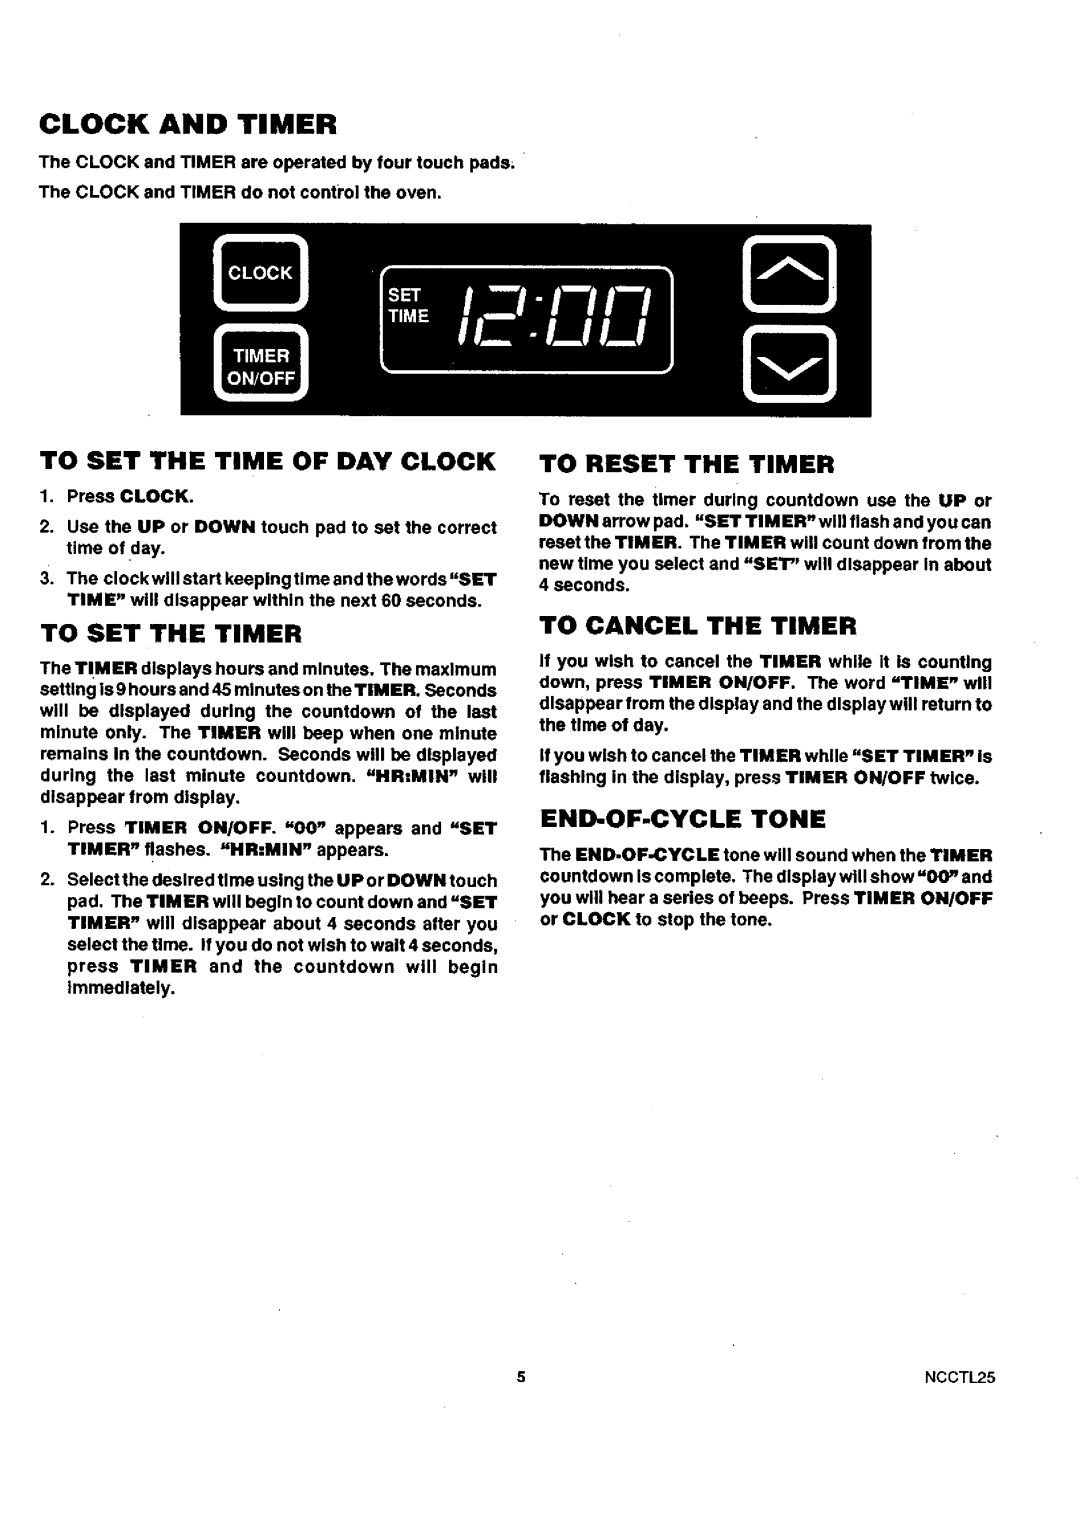 Sears 45321 Clock And Timer, To Set The Time Of Day Clock, To Set The Timer, To Reset The Timer, To Cancel The Timer 